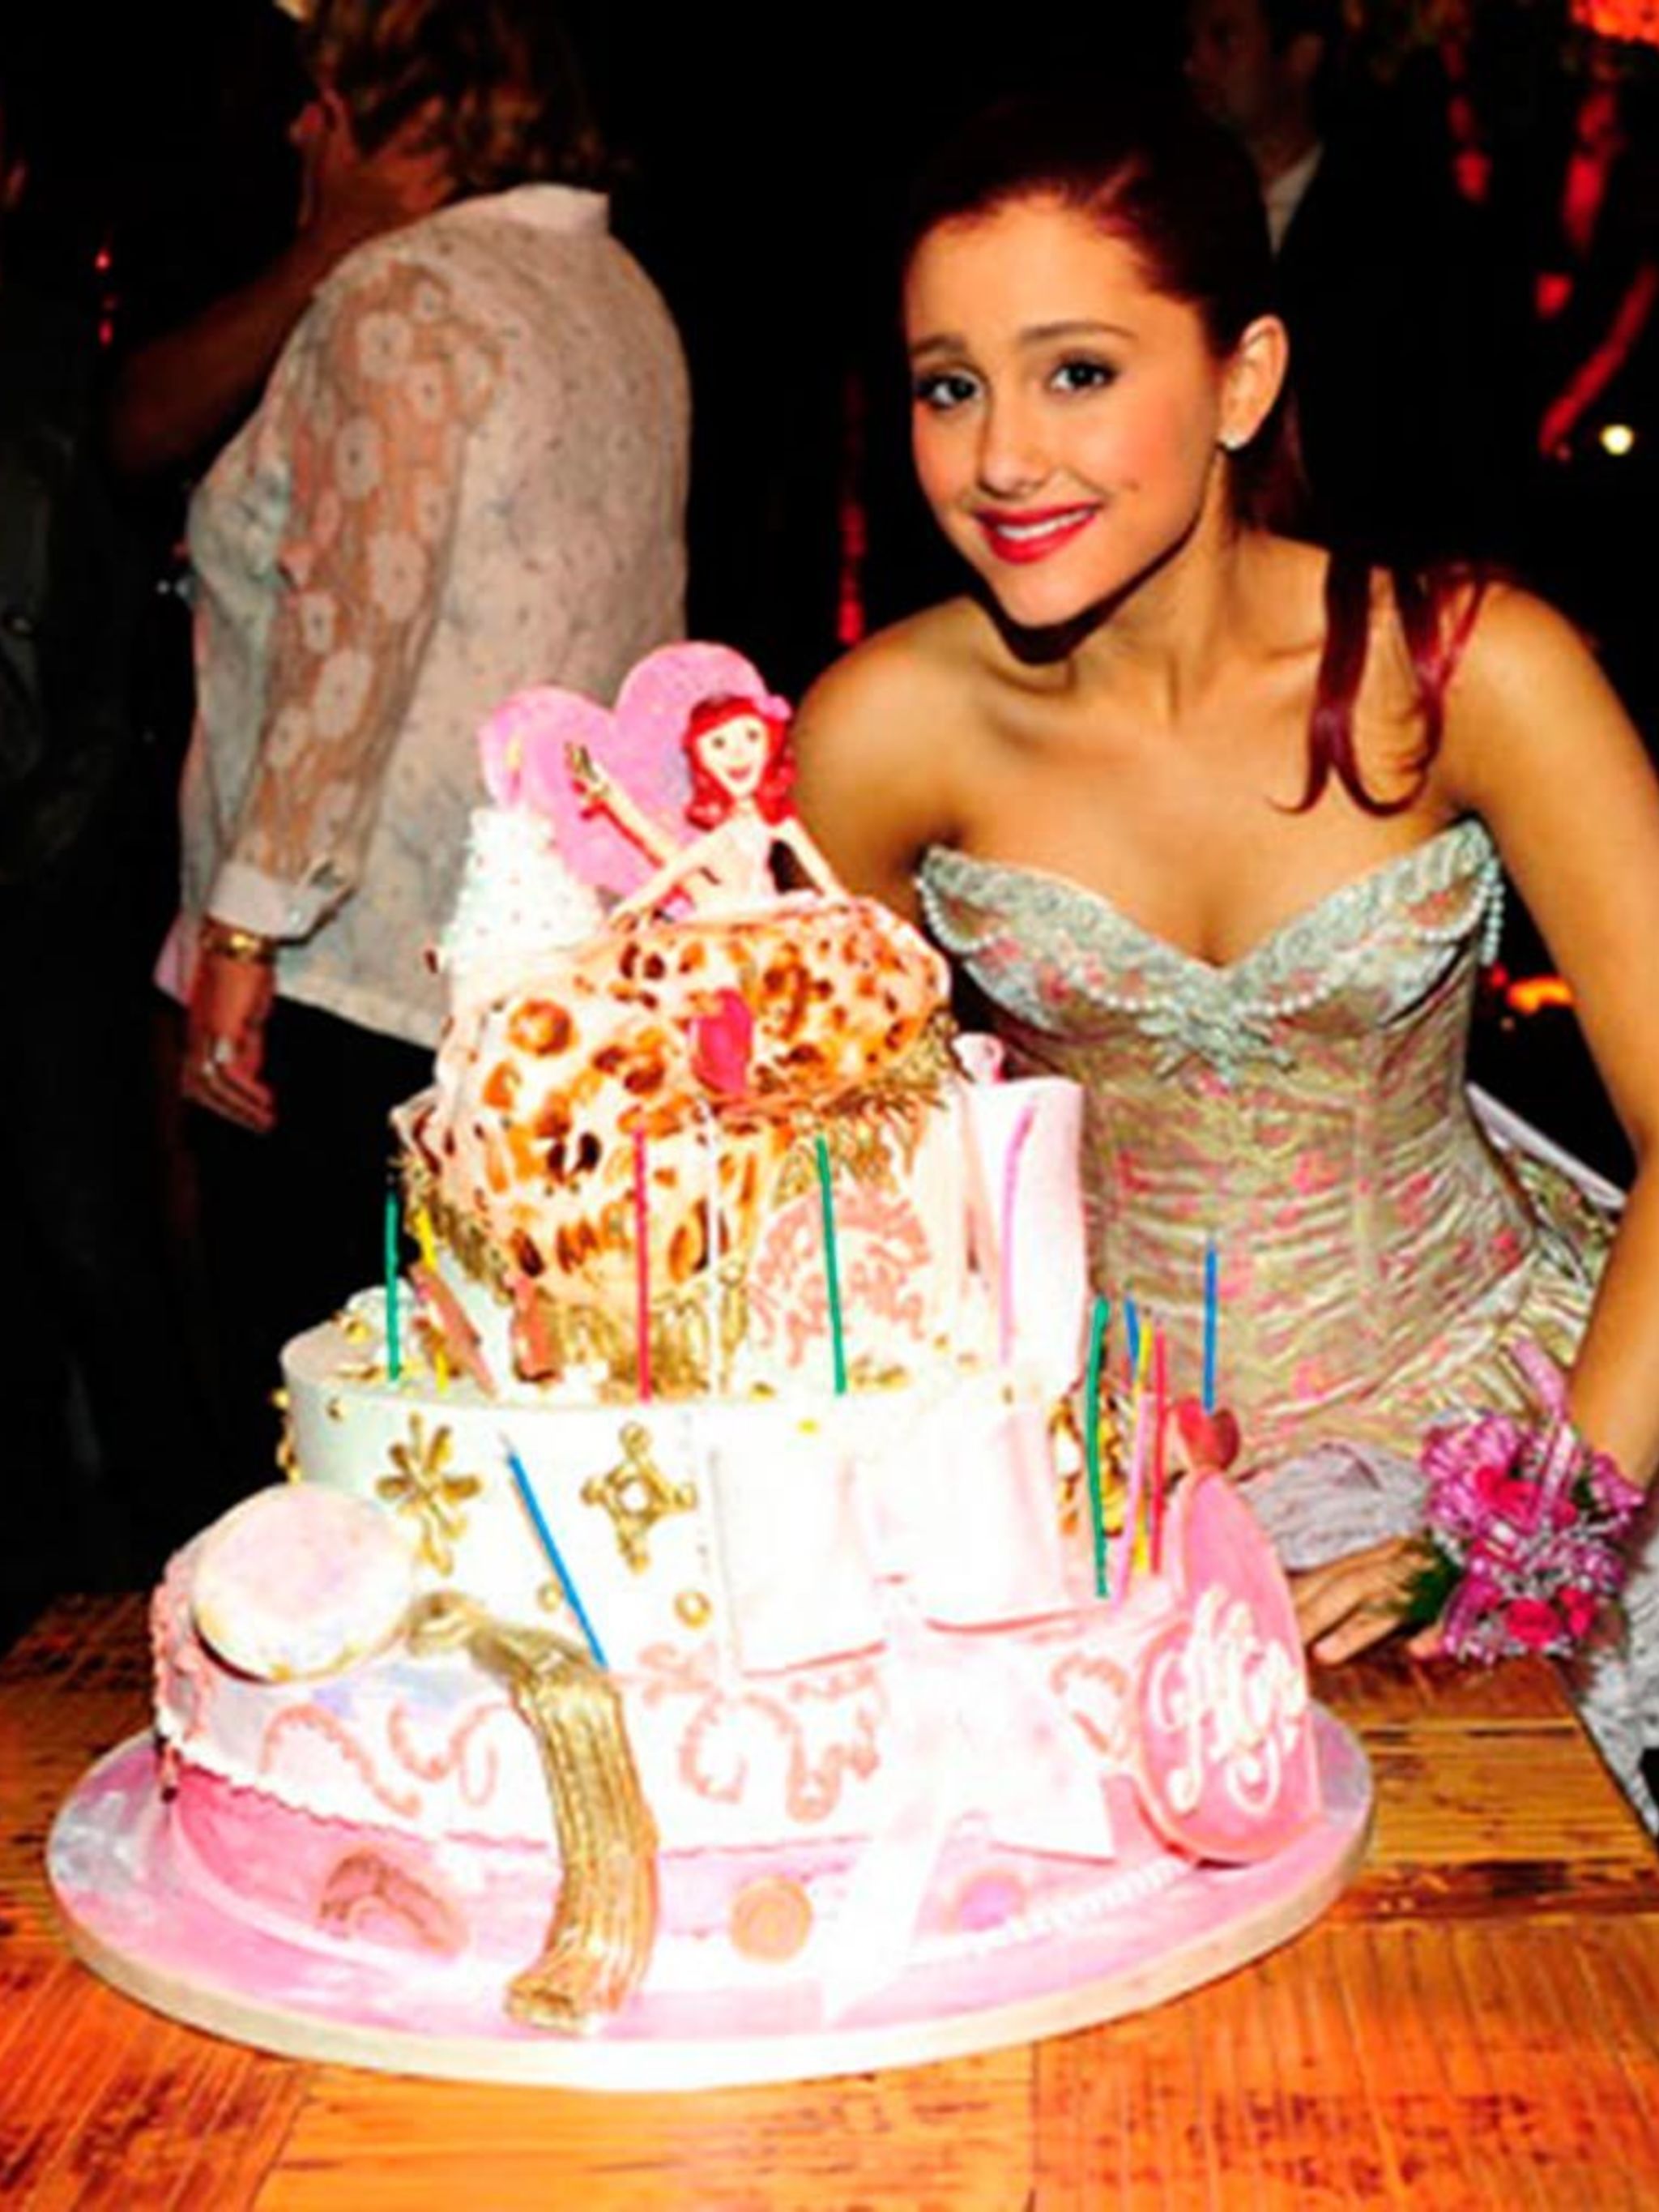 Best Most Insanely Expensive Celebrity Wedding Cakes Recipes, News, Tips  And How-Tos